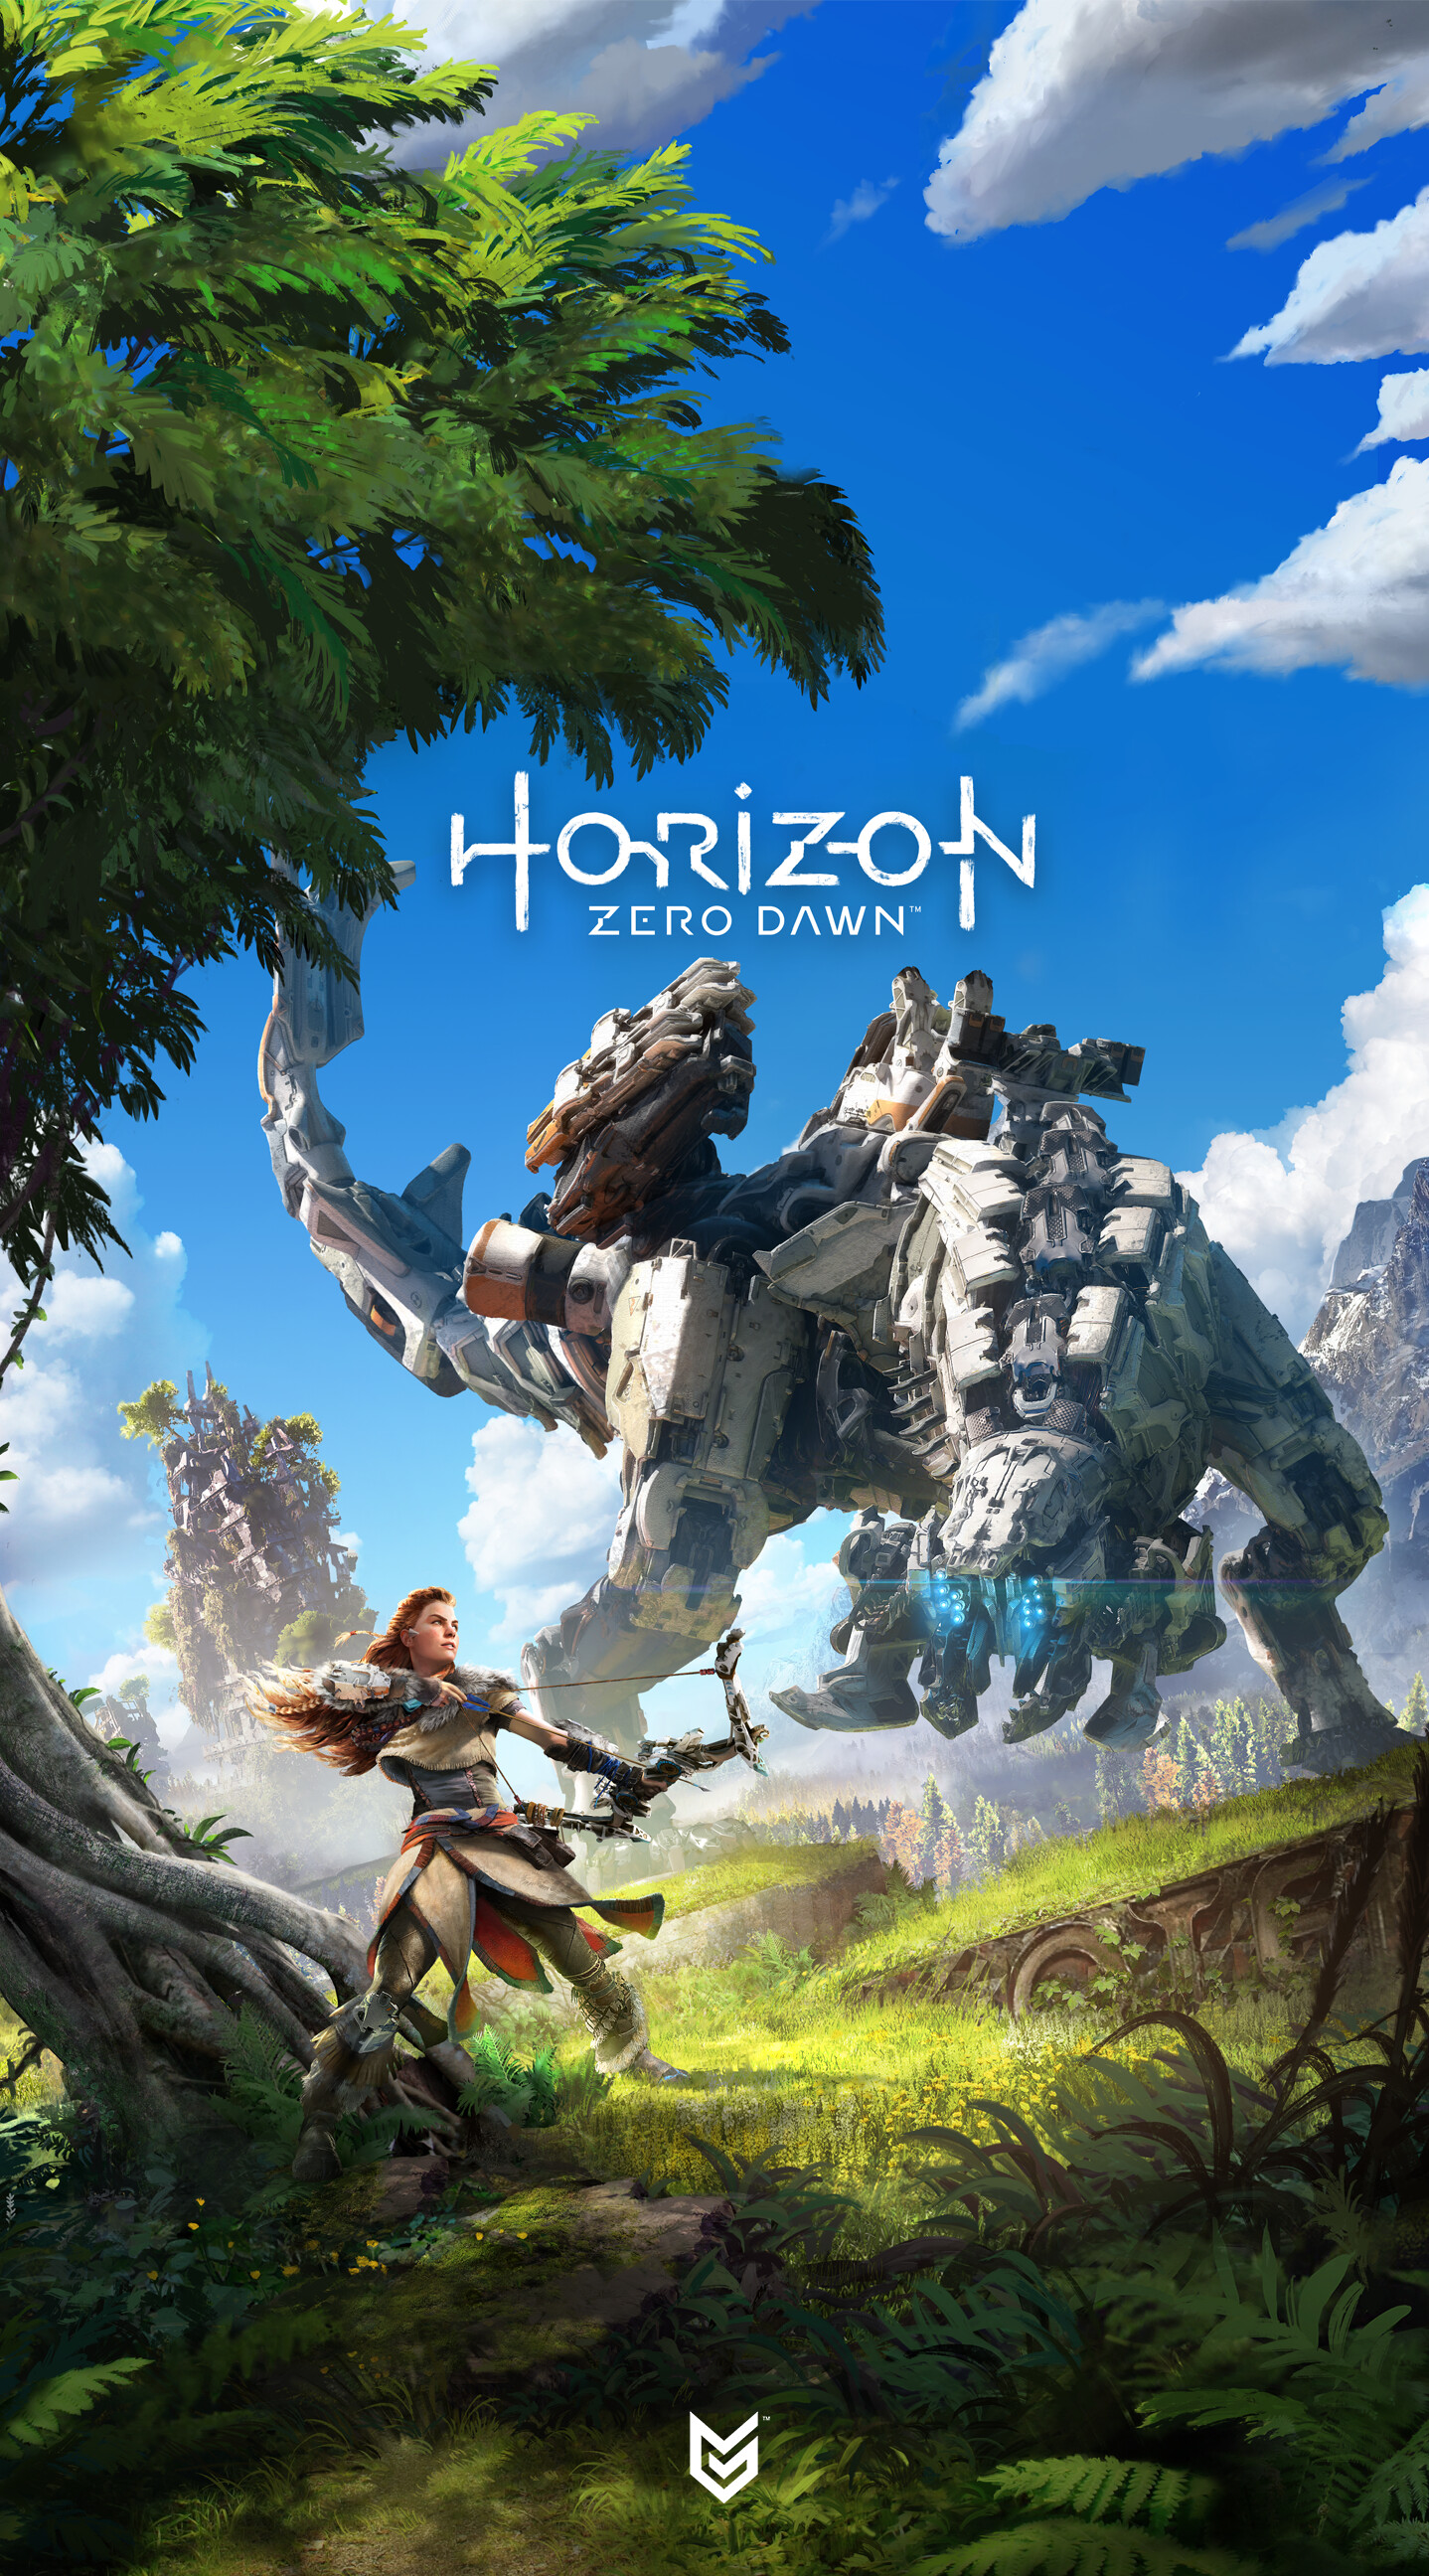 Horizon Zero Dawn: An action role-playing game takes place in a post-apocalyptic world where colossal machines dominate the land. 1440x2600 HD Wallpaper.